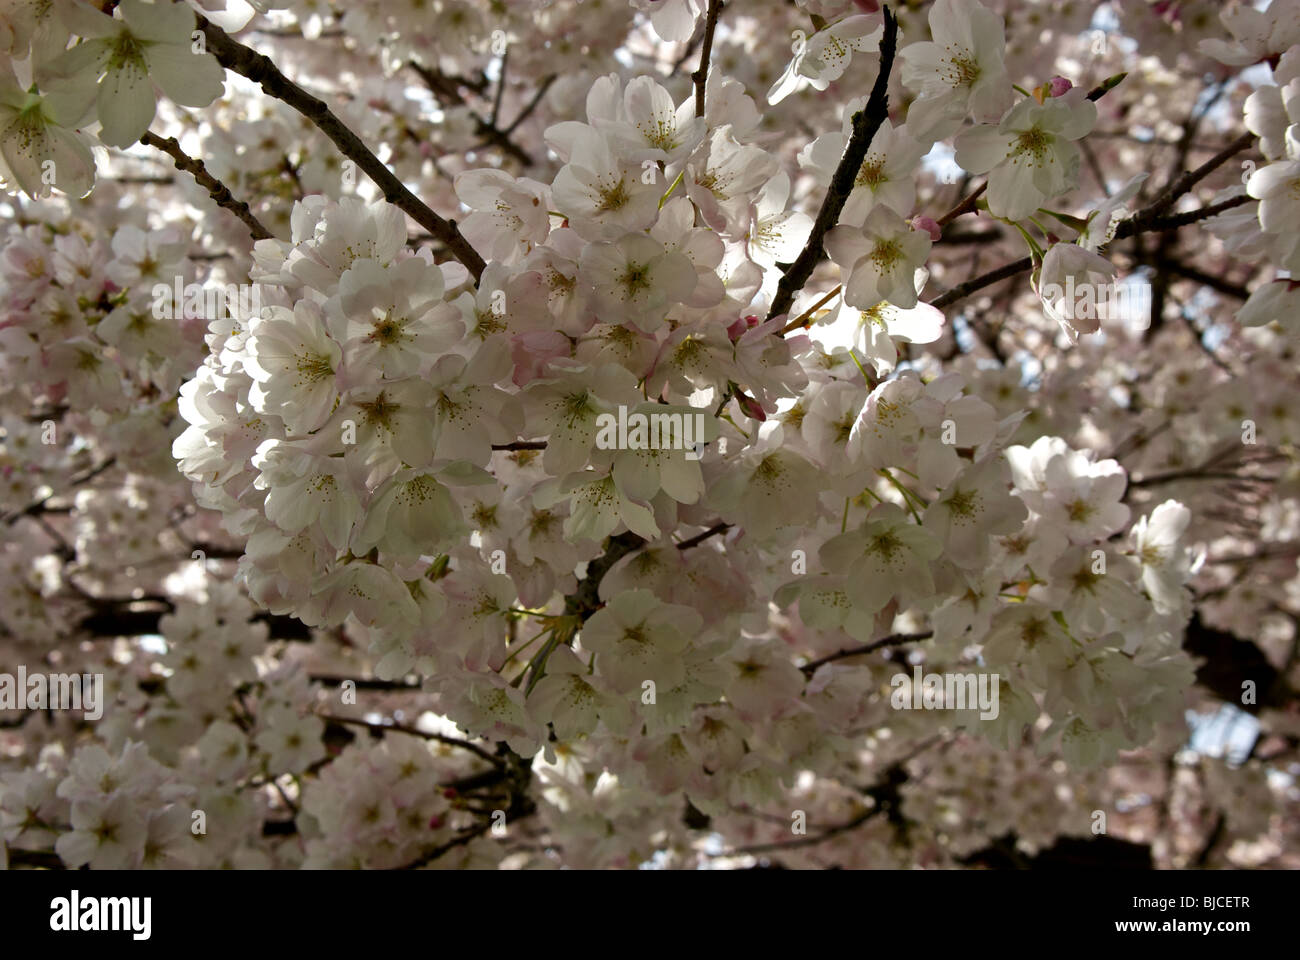 Soft delicate profusion of pink tinged white Japanese cherry blossoms in a dense overhead canopy of blooms Stock Photo